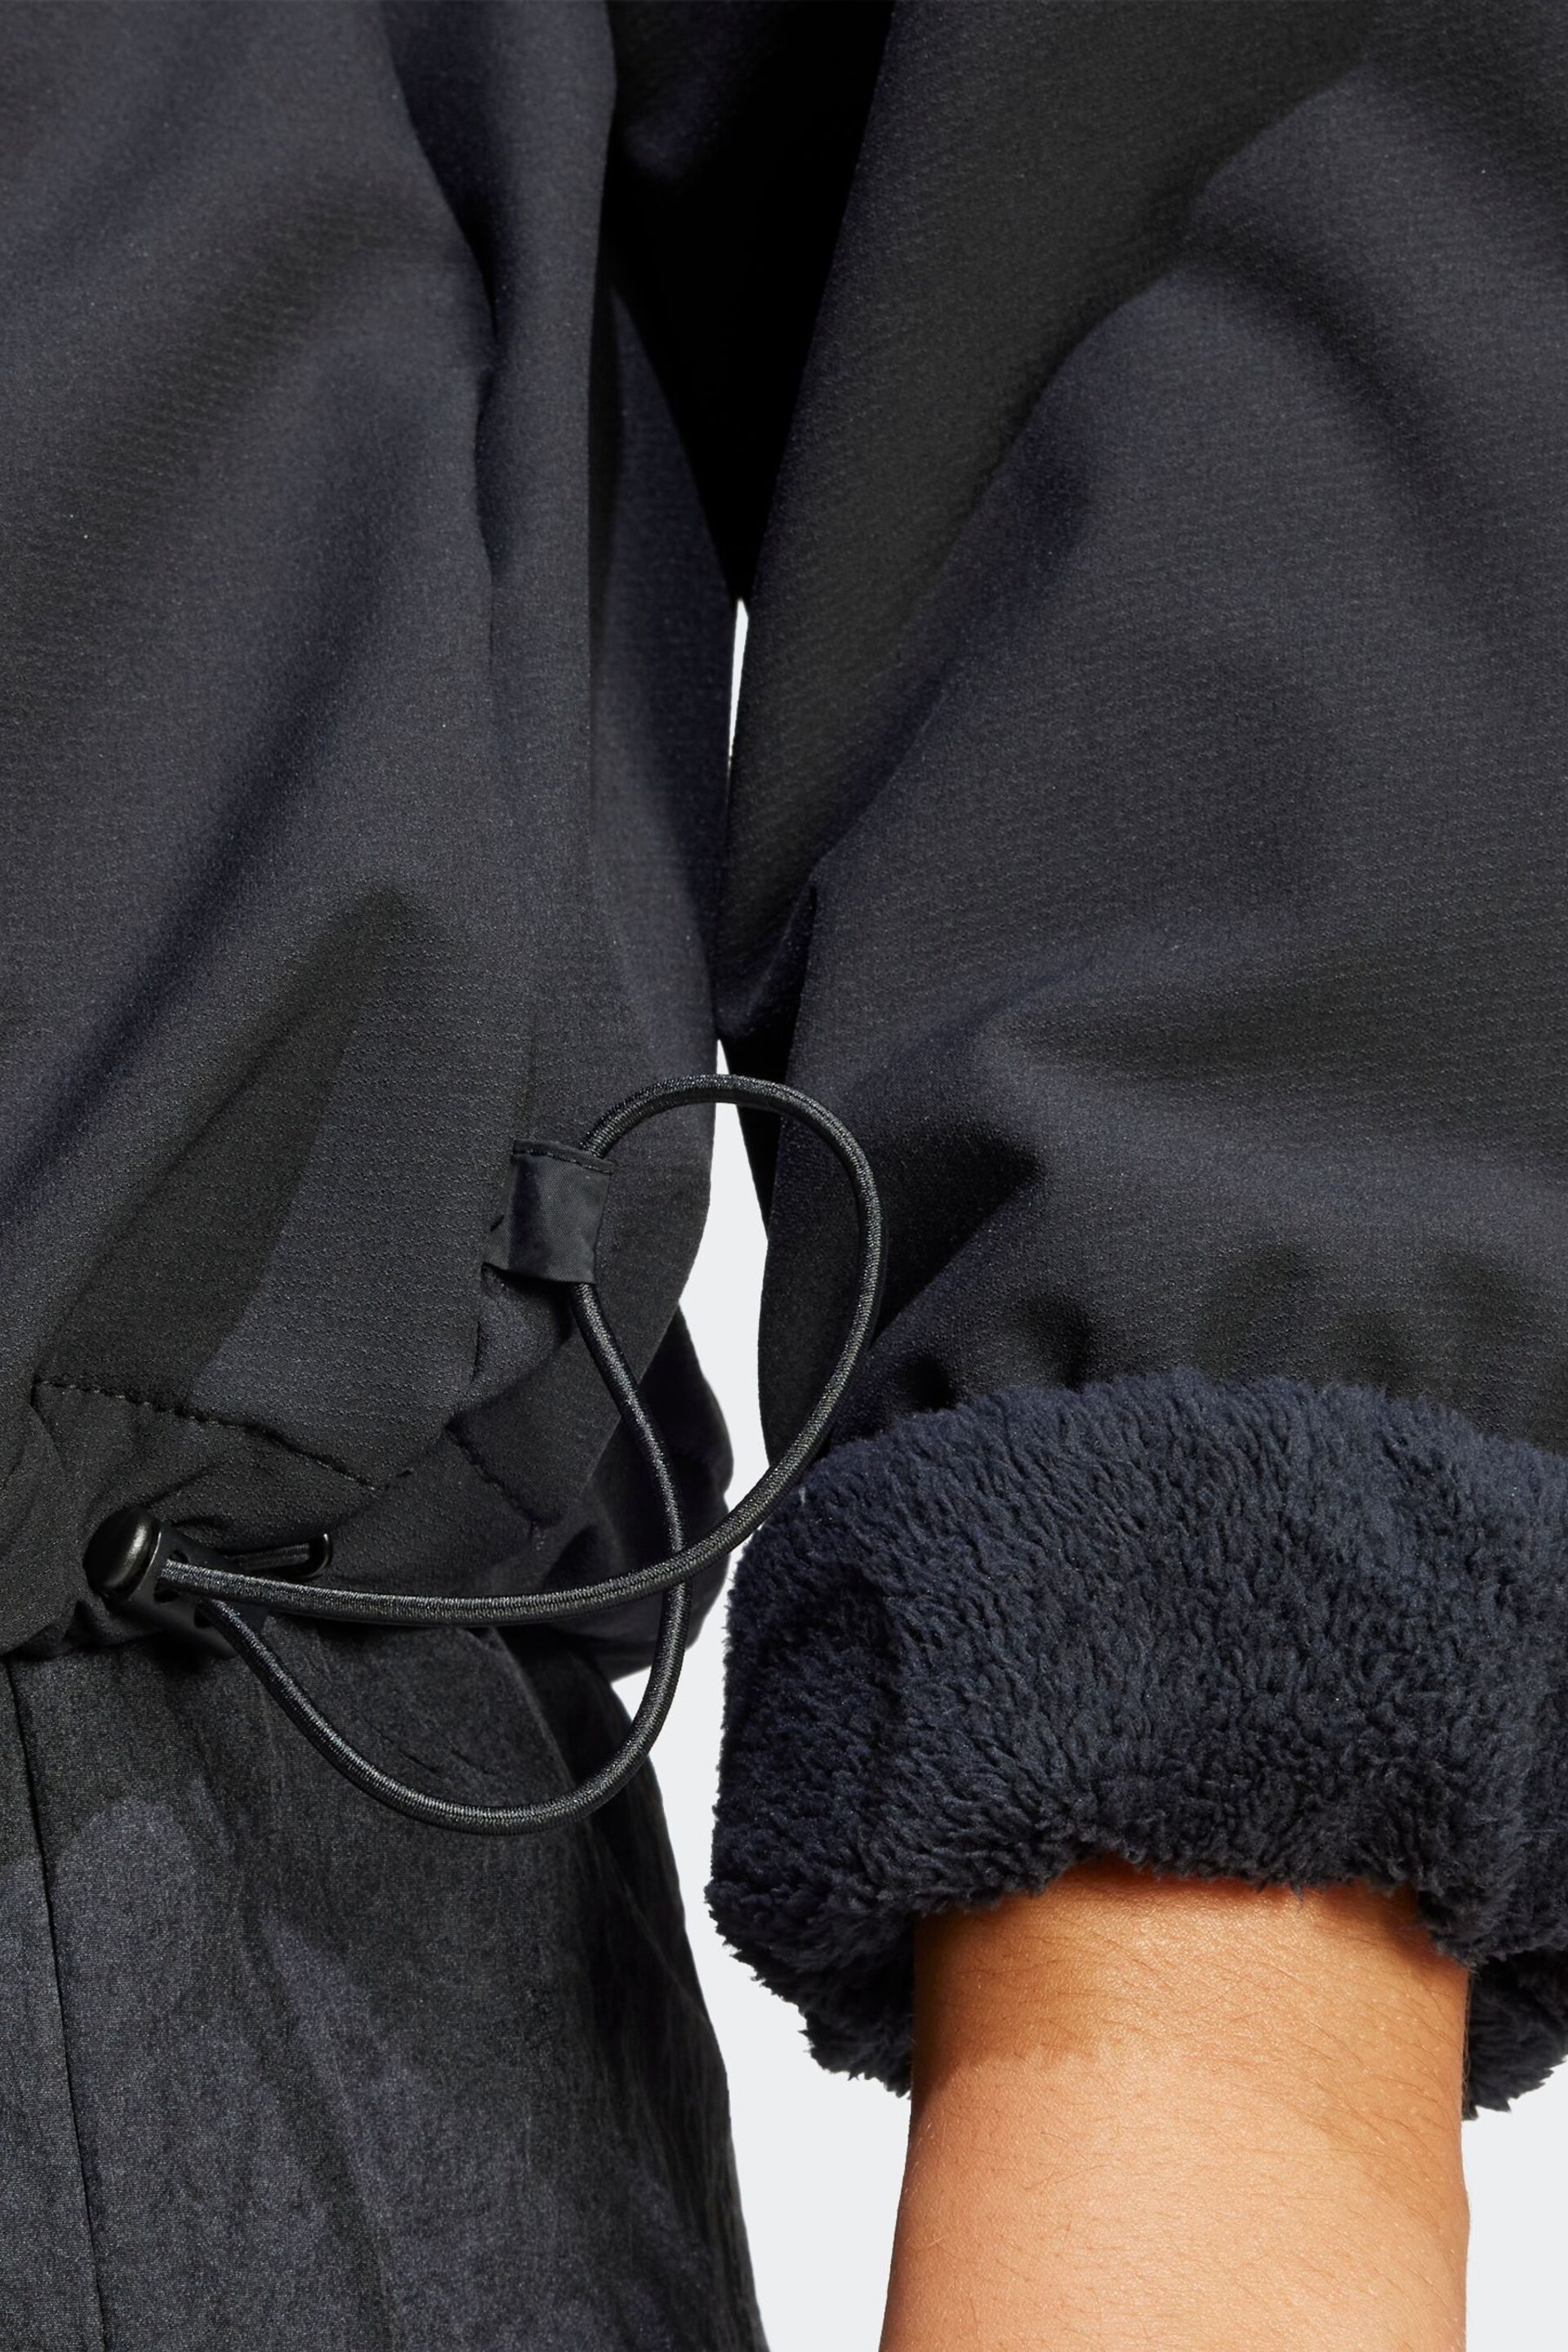 adidas Black Sportswear City Escape Hoodie With Bungee Cord - Image 6 of 7